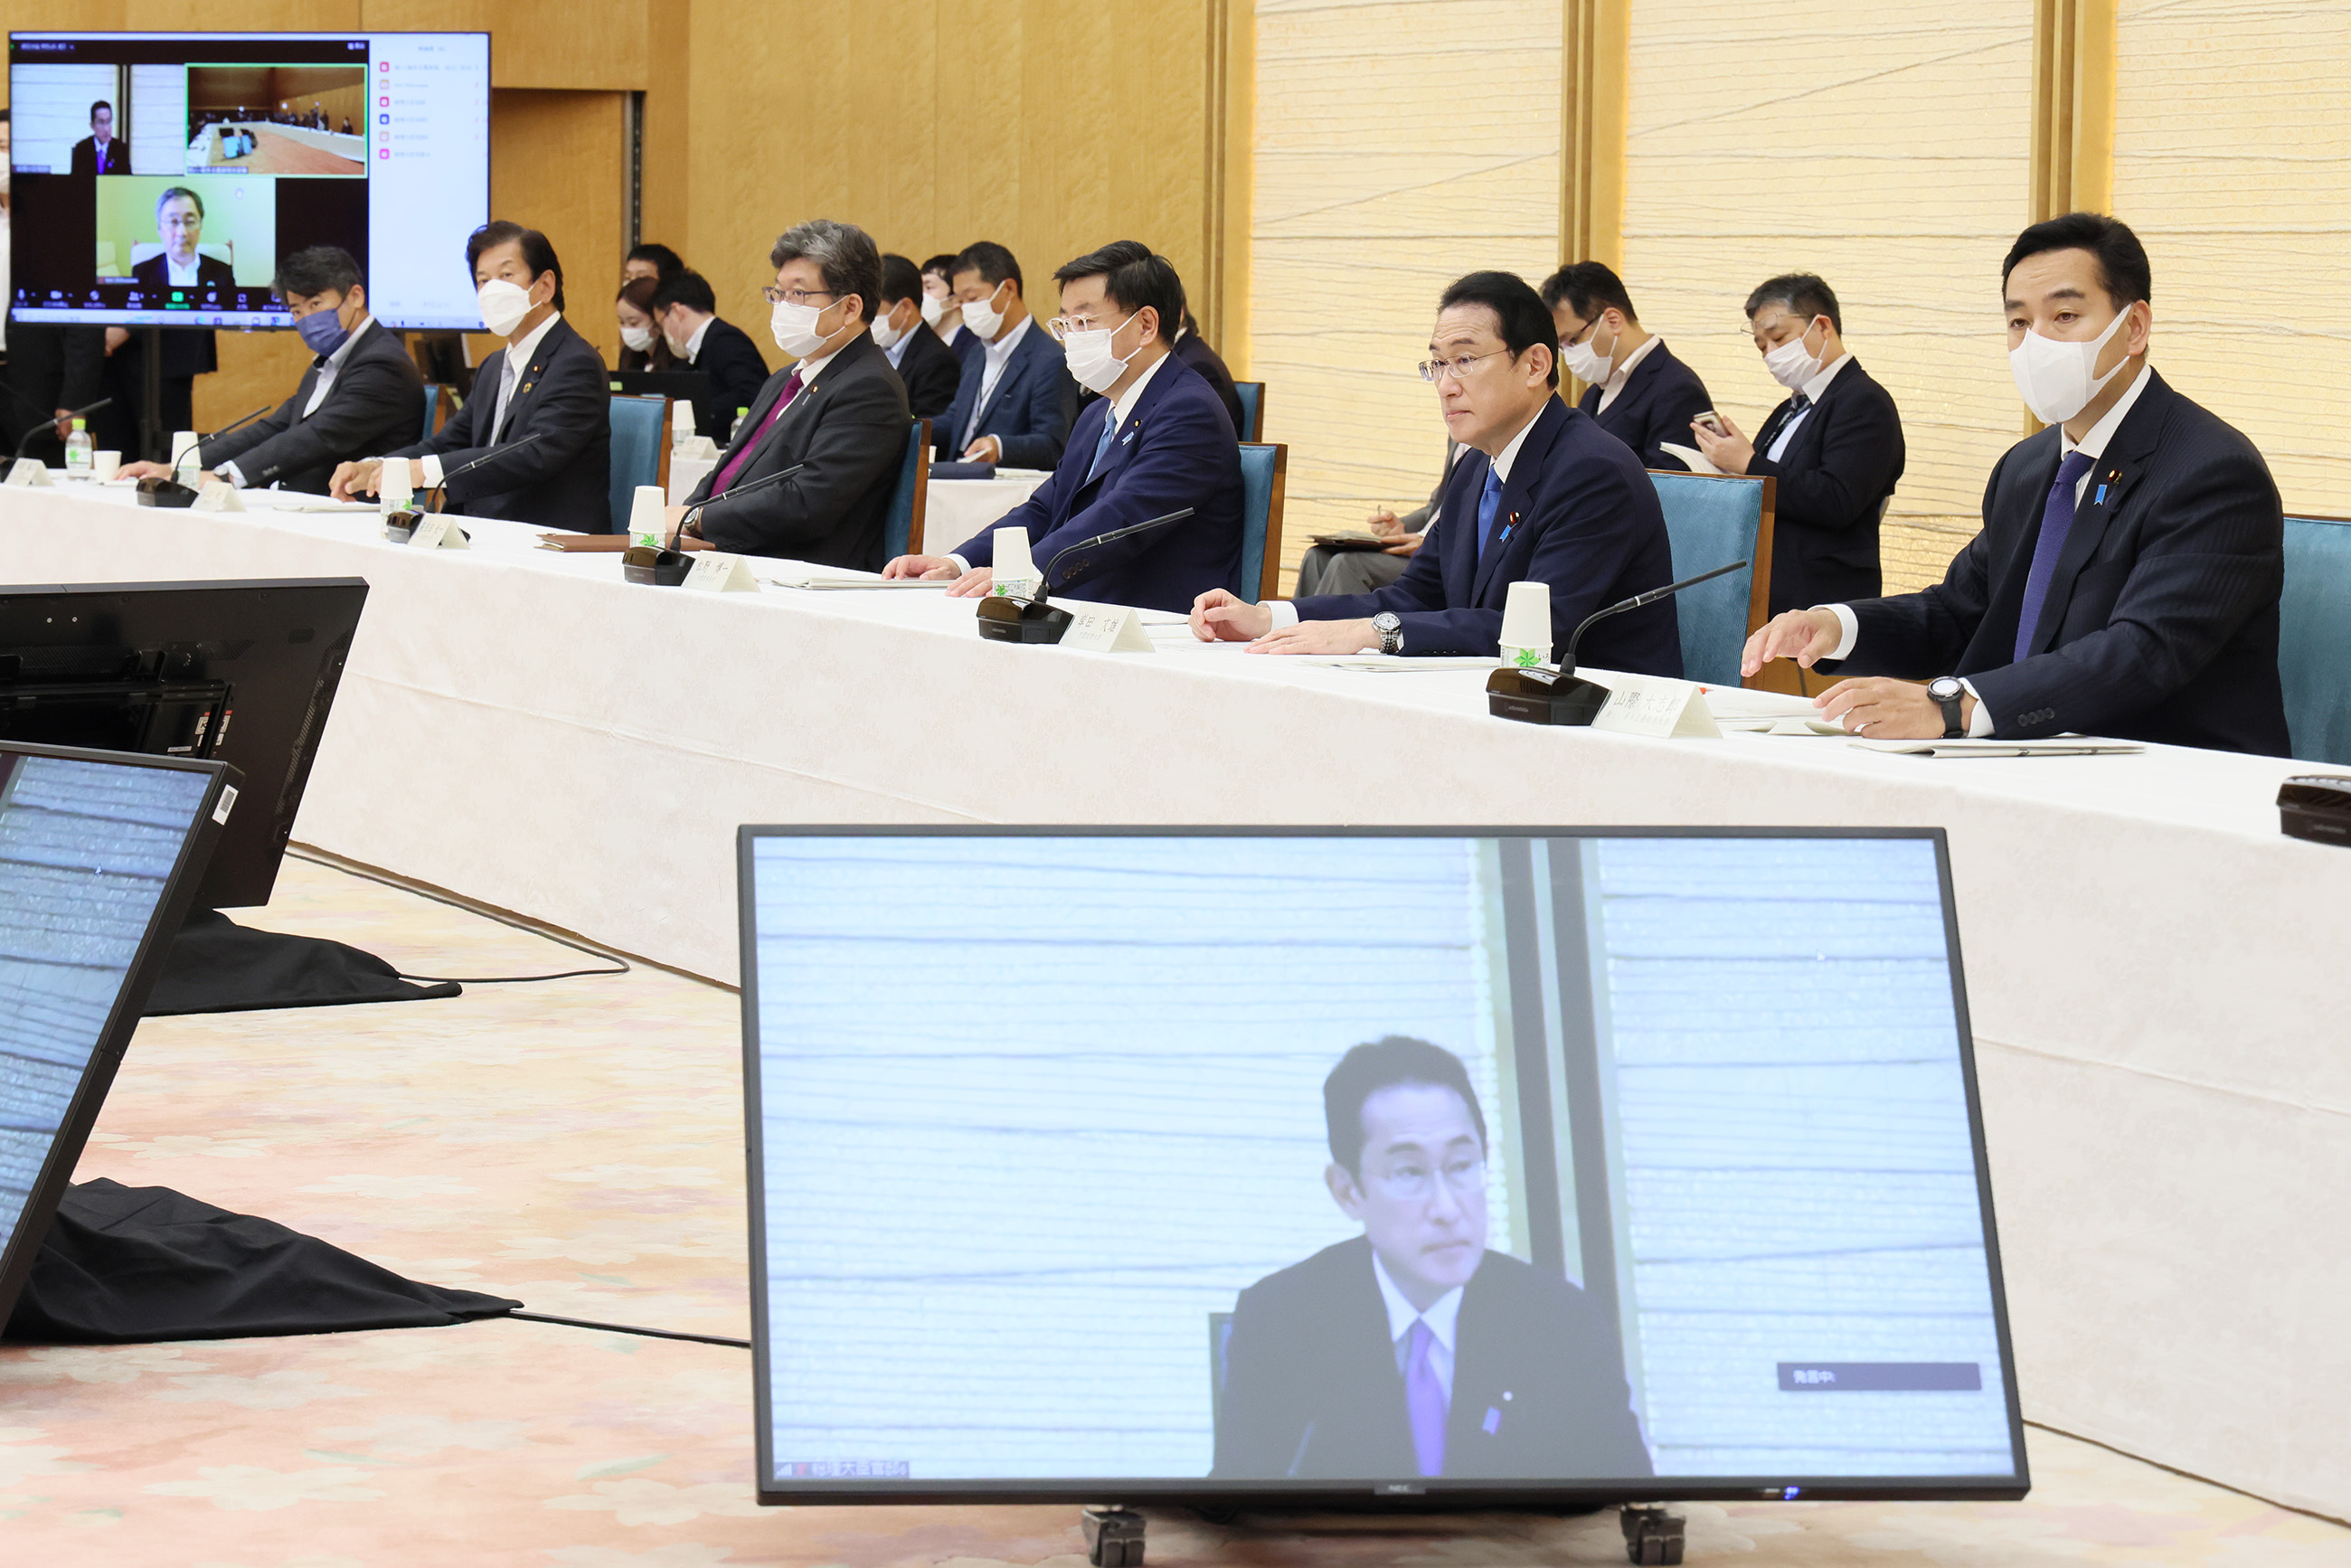 Photograph of the Prime Minister wrapping up a meeting (2)